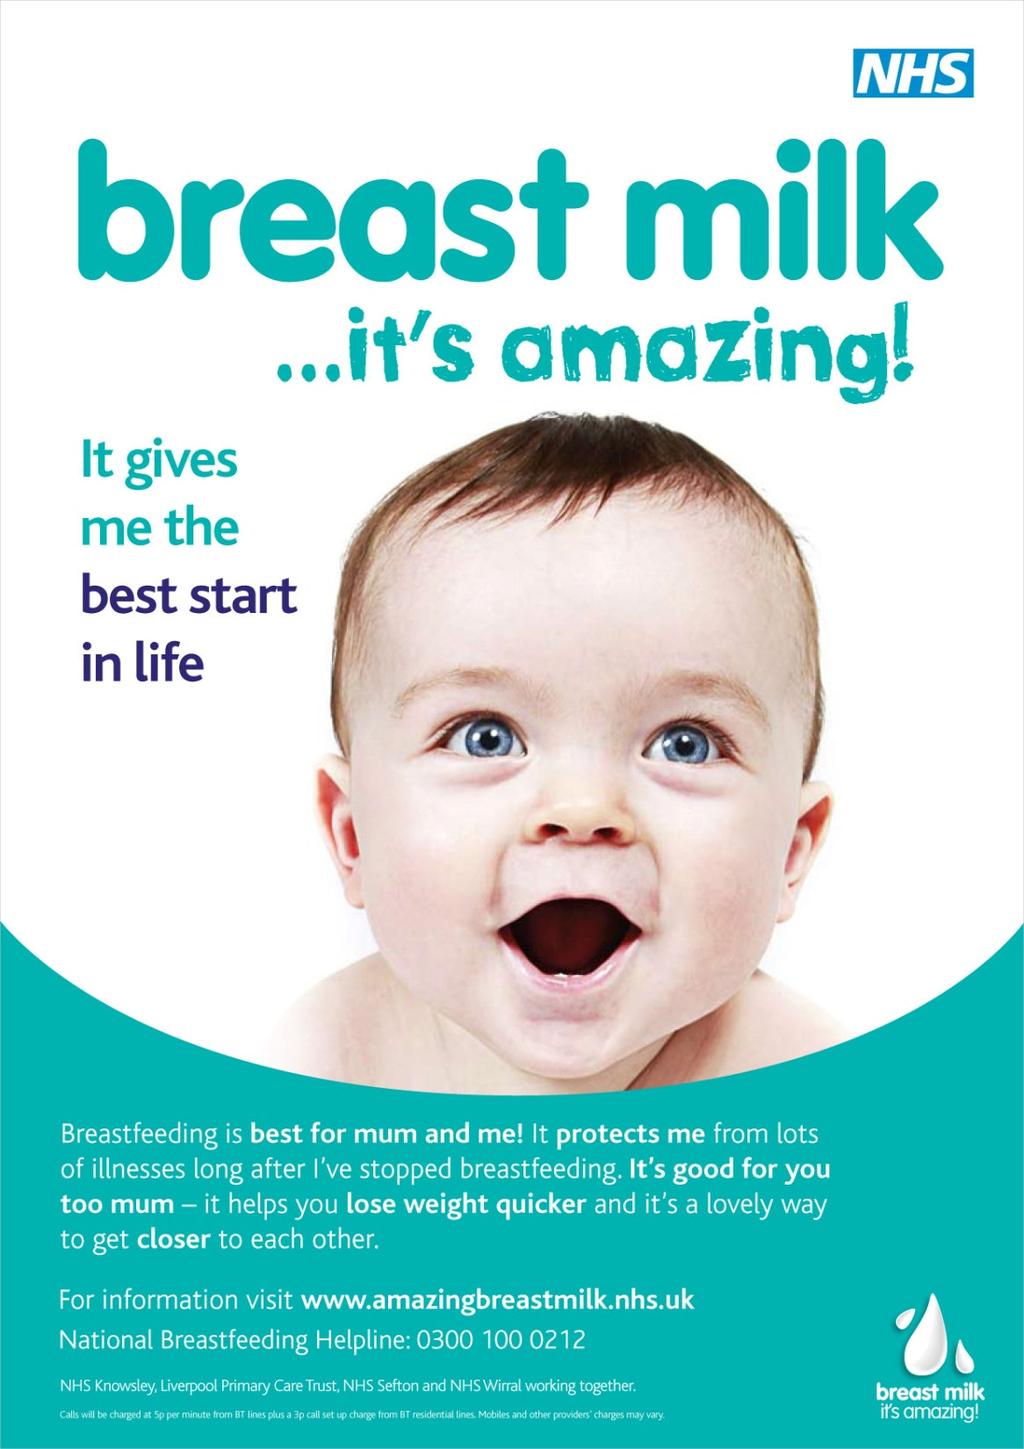 We take Breastfeeding very seriously and have recently set up a Bosom Buddies Breastfeeding Interest Group